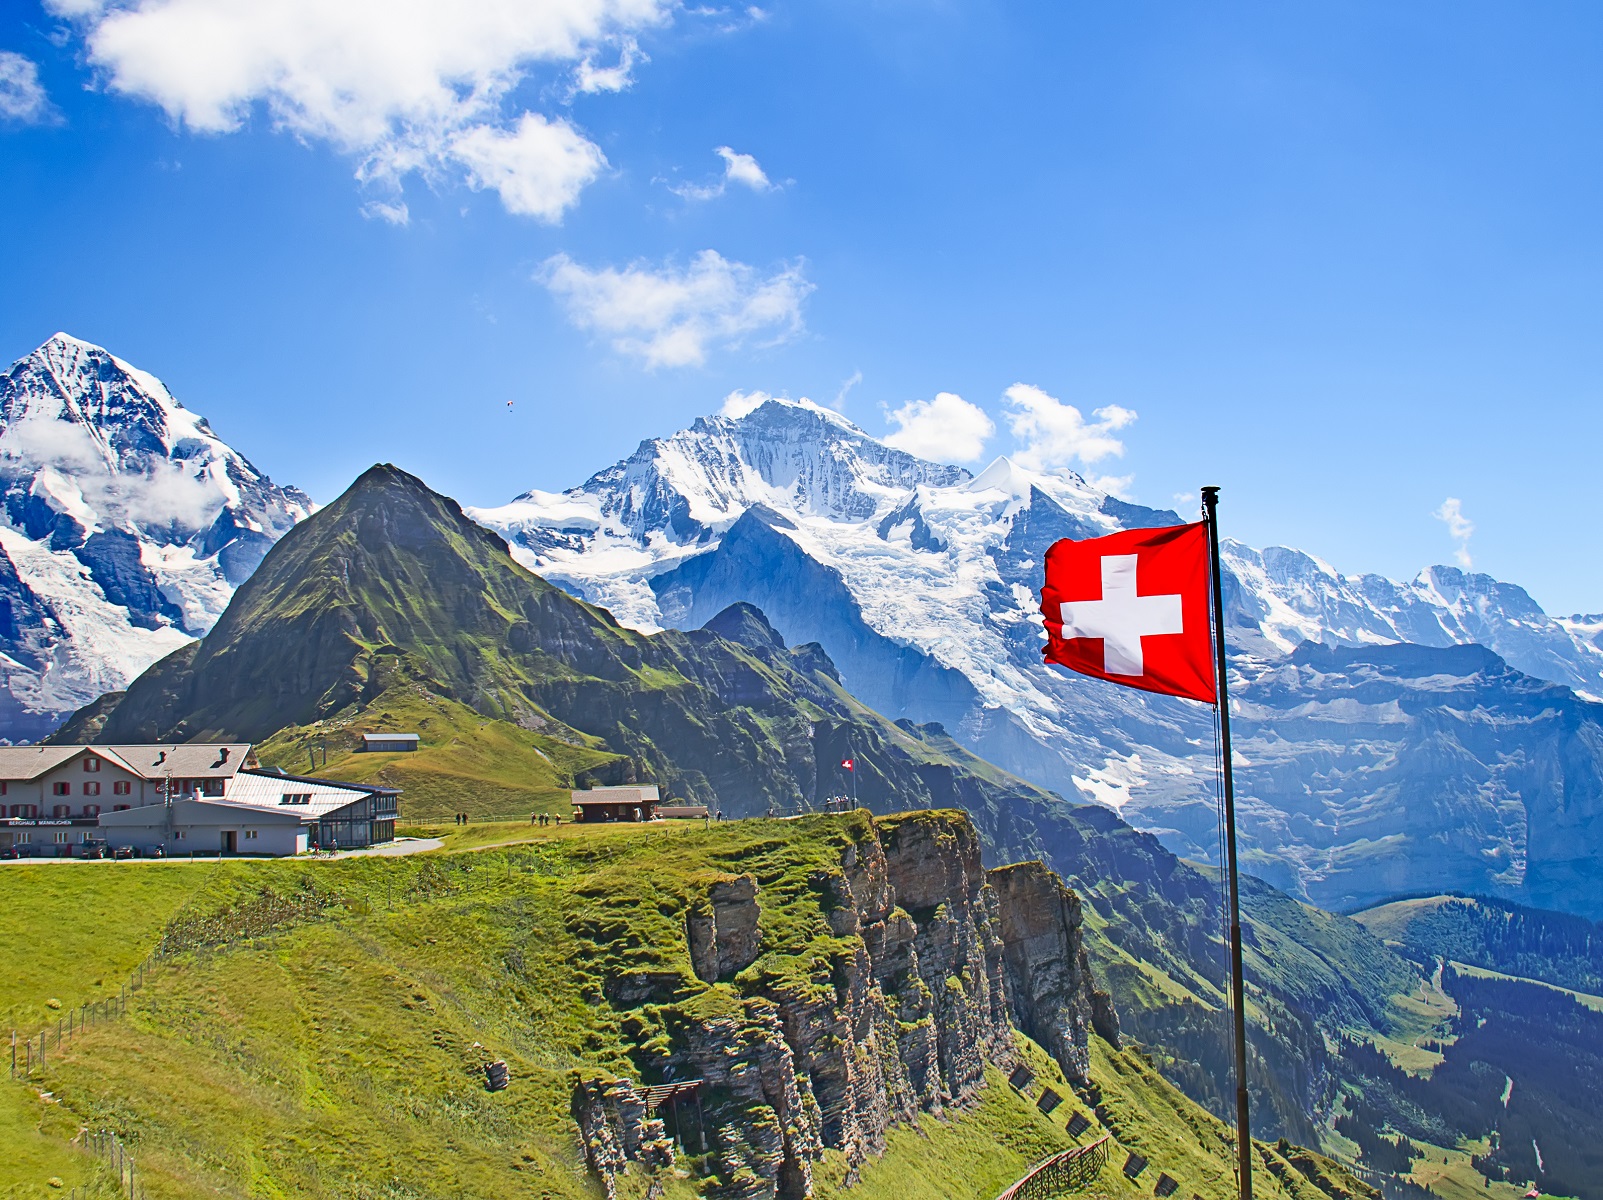 Switzerland Approves Bitcoin Banks – But With Strict Conditions Attached